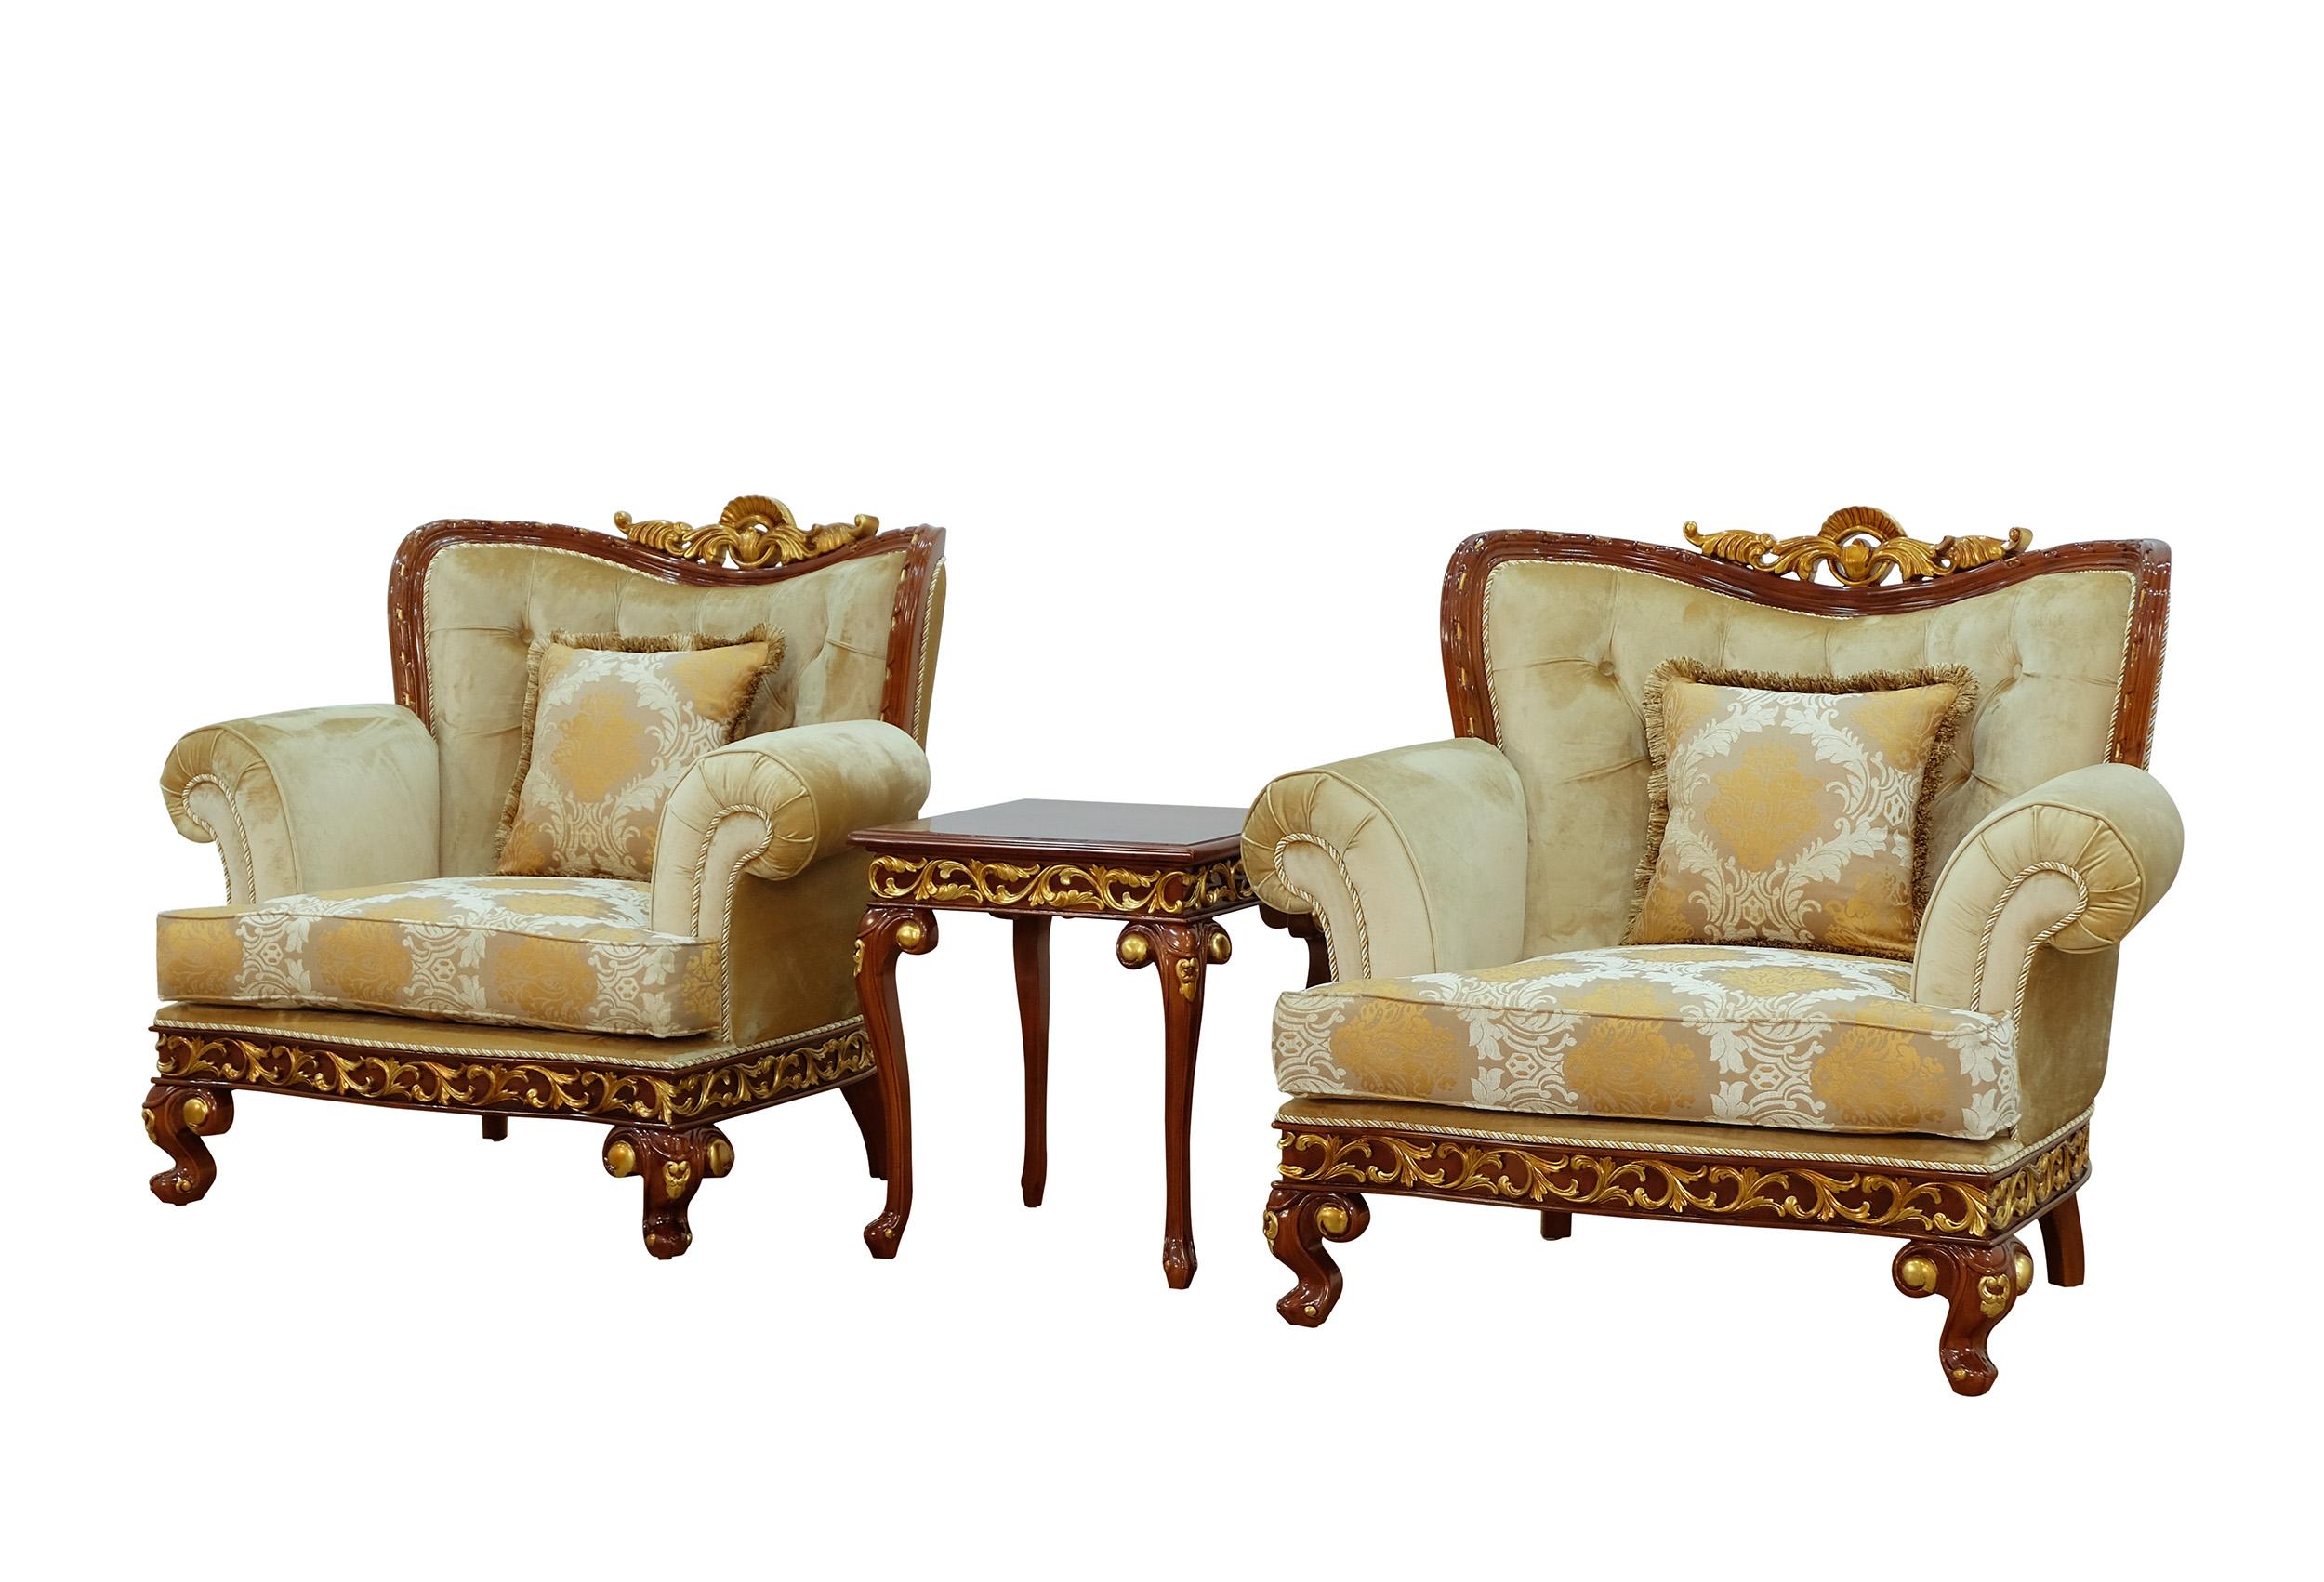 Classic, Traditional Arm Chair Set FANTASIA 40019-C-Set-2 in Sand, Walnut, Gold Fabric